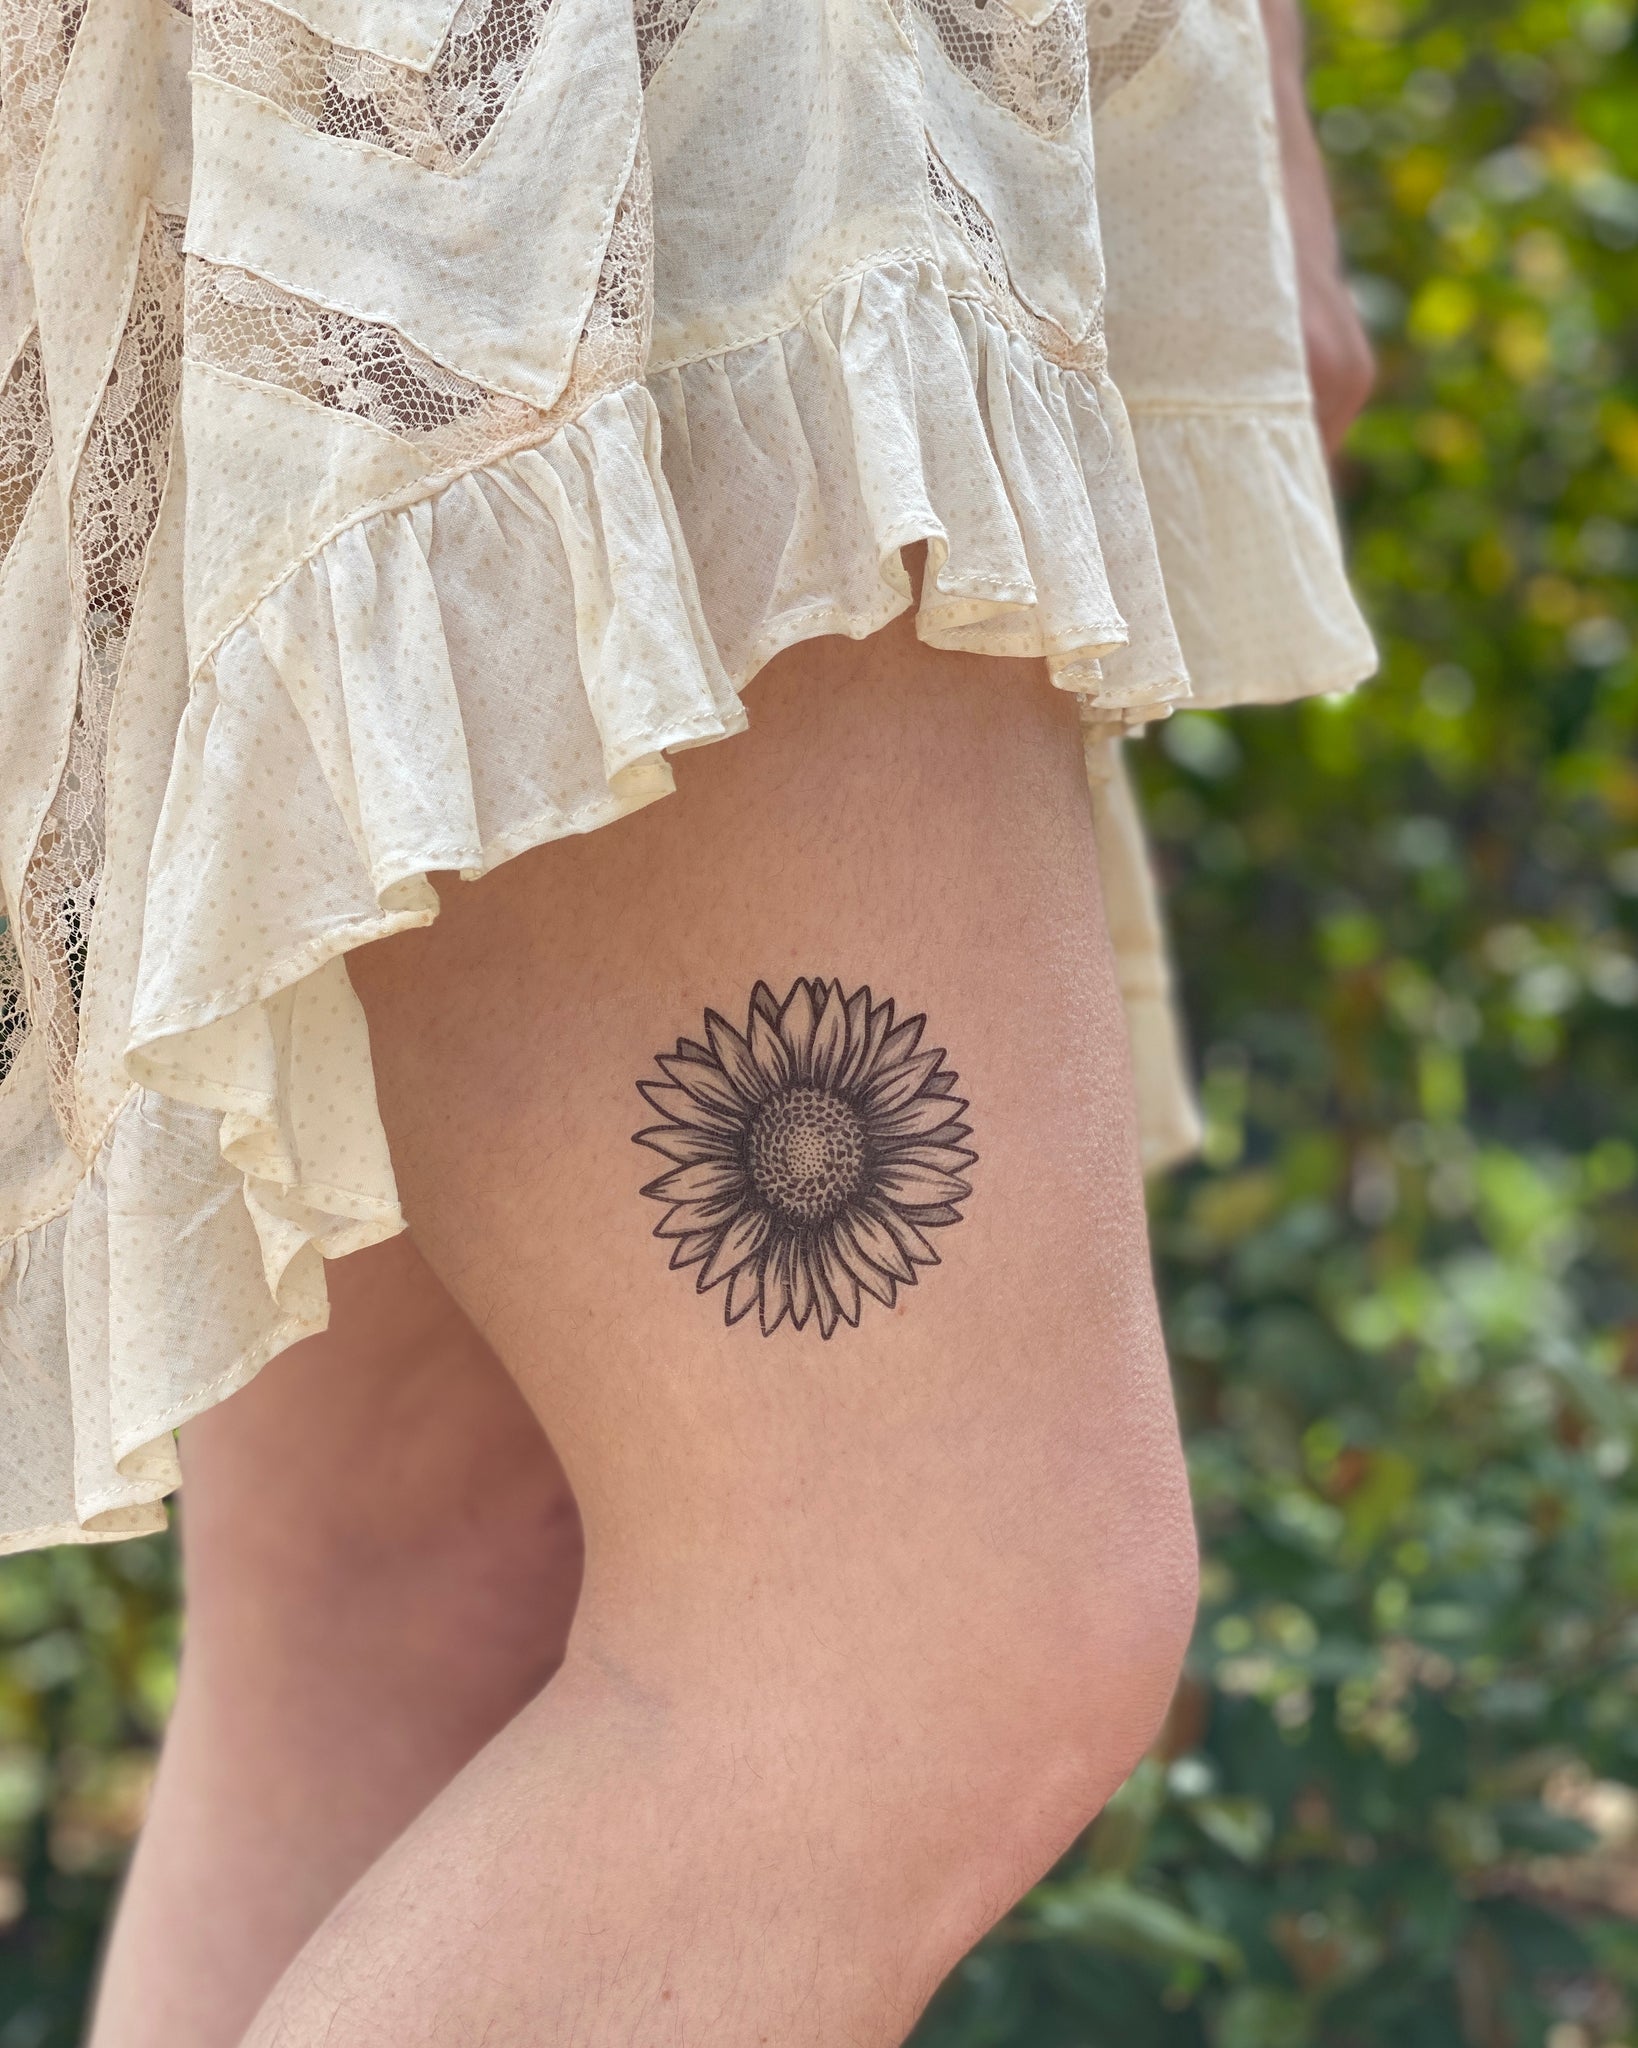 Amazoncom  Dopetattoo Sunflower Temporary Tattoo Realistic Sunflowers  Fake tattoos for Women Girls Adults  Beauty  Personal Care